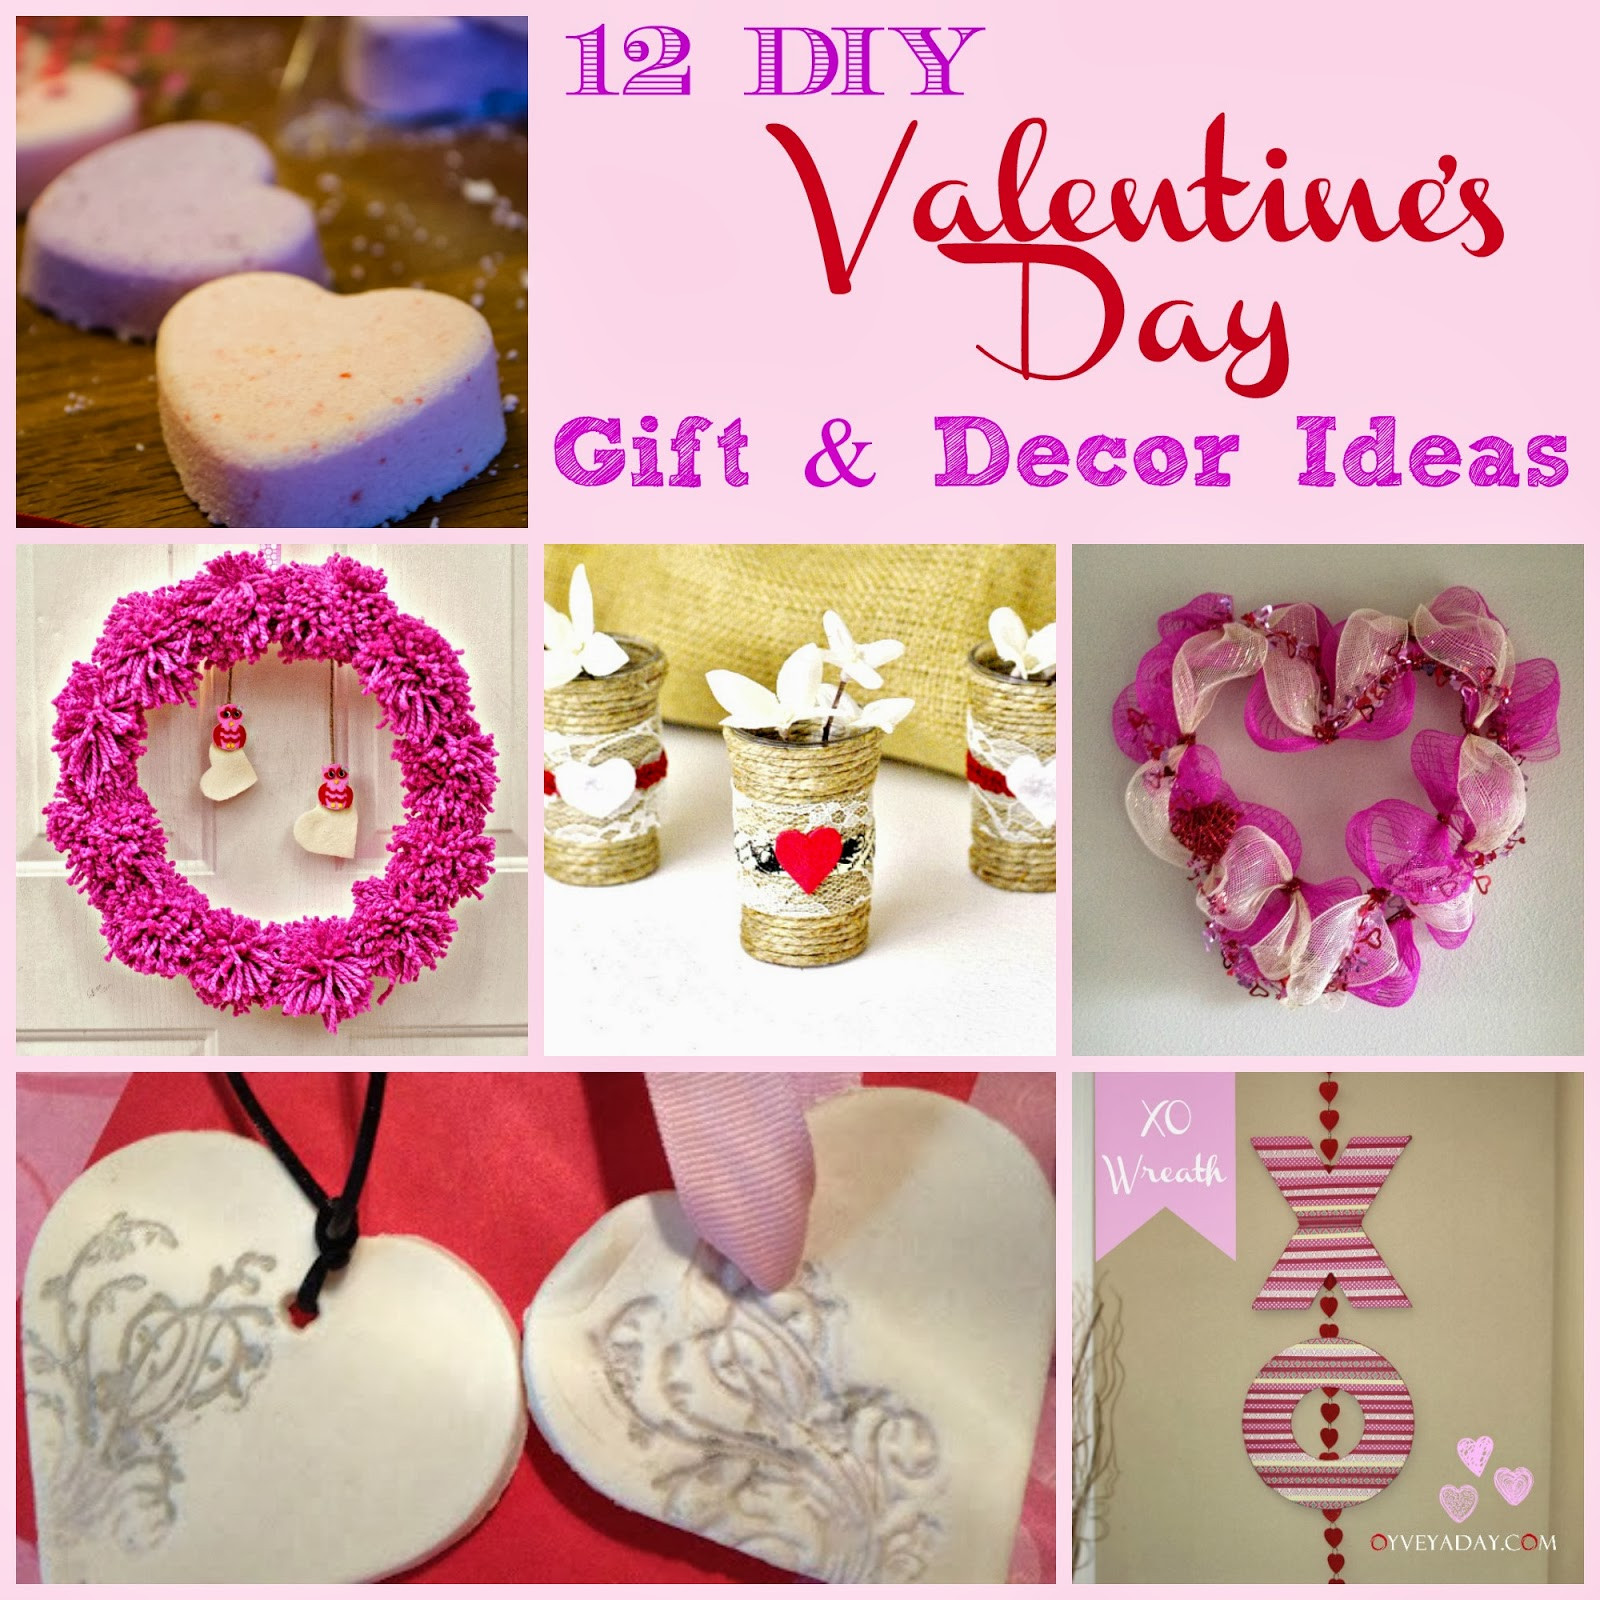 Valentines Day Diy
 12 DIY Valentine s Day Gift & Decor Ideas Outnumbered 3 to 1